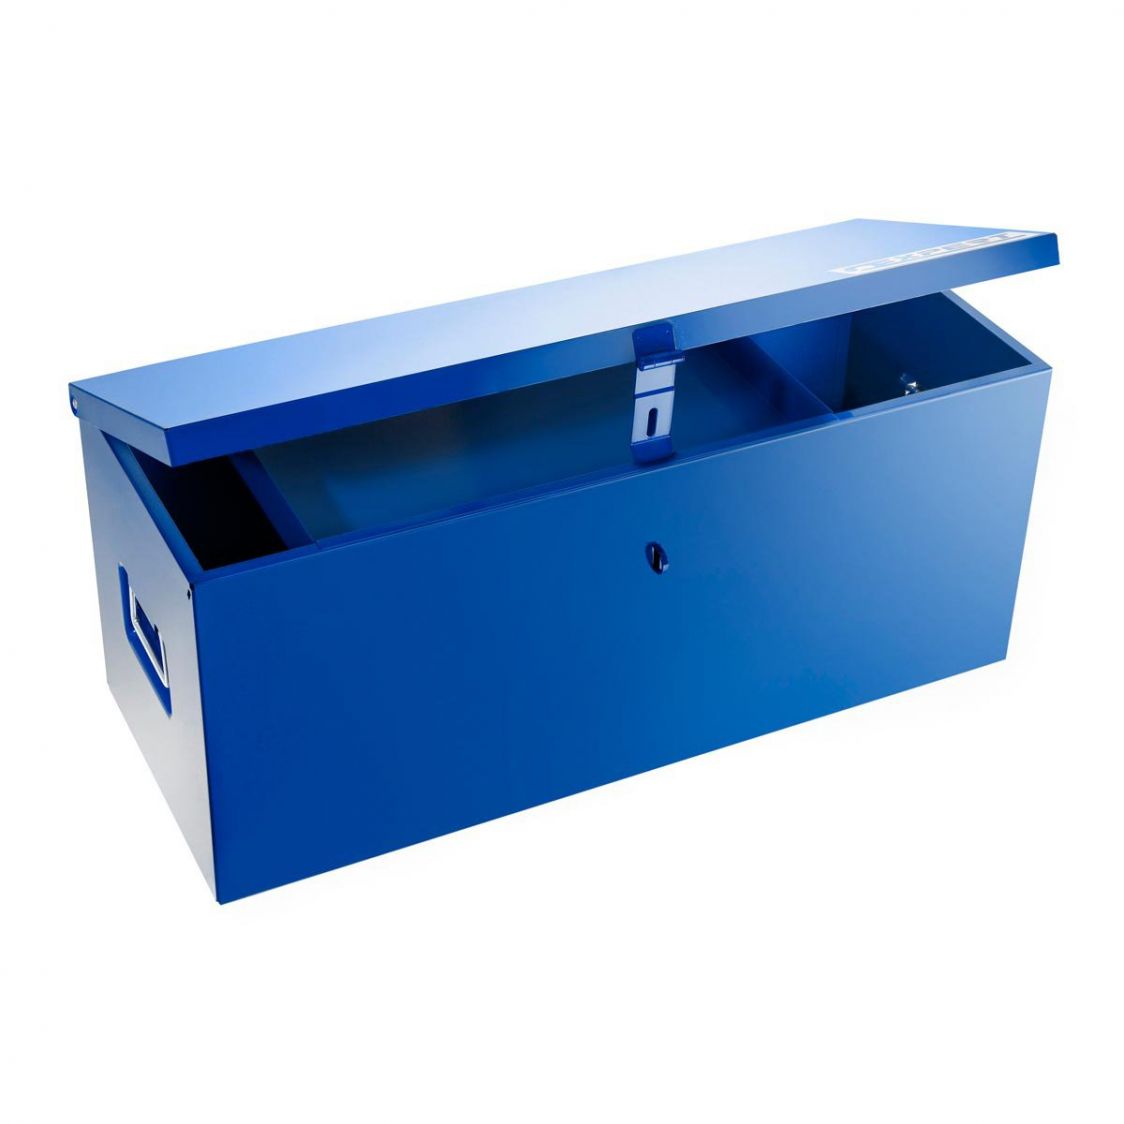 EXPERT by FACOM E010203 - 850mm Worksite Tool Chest